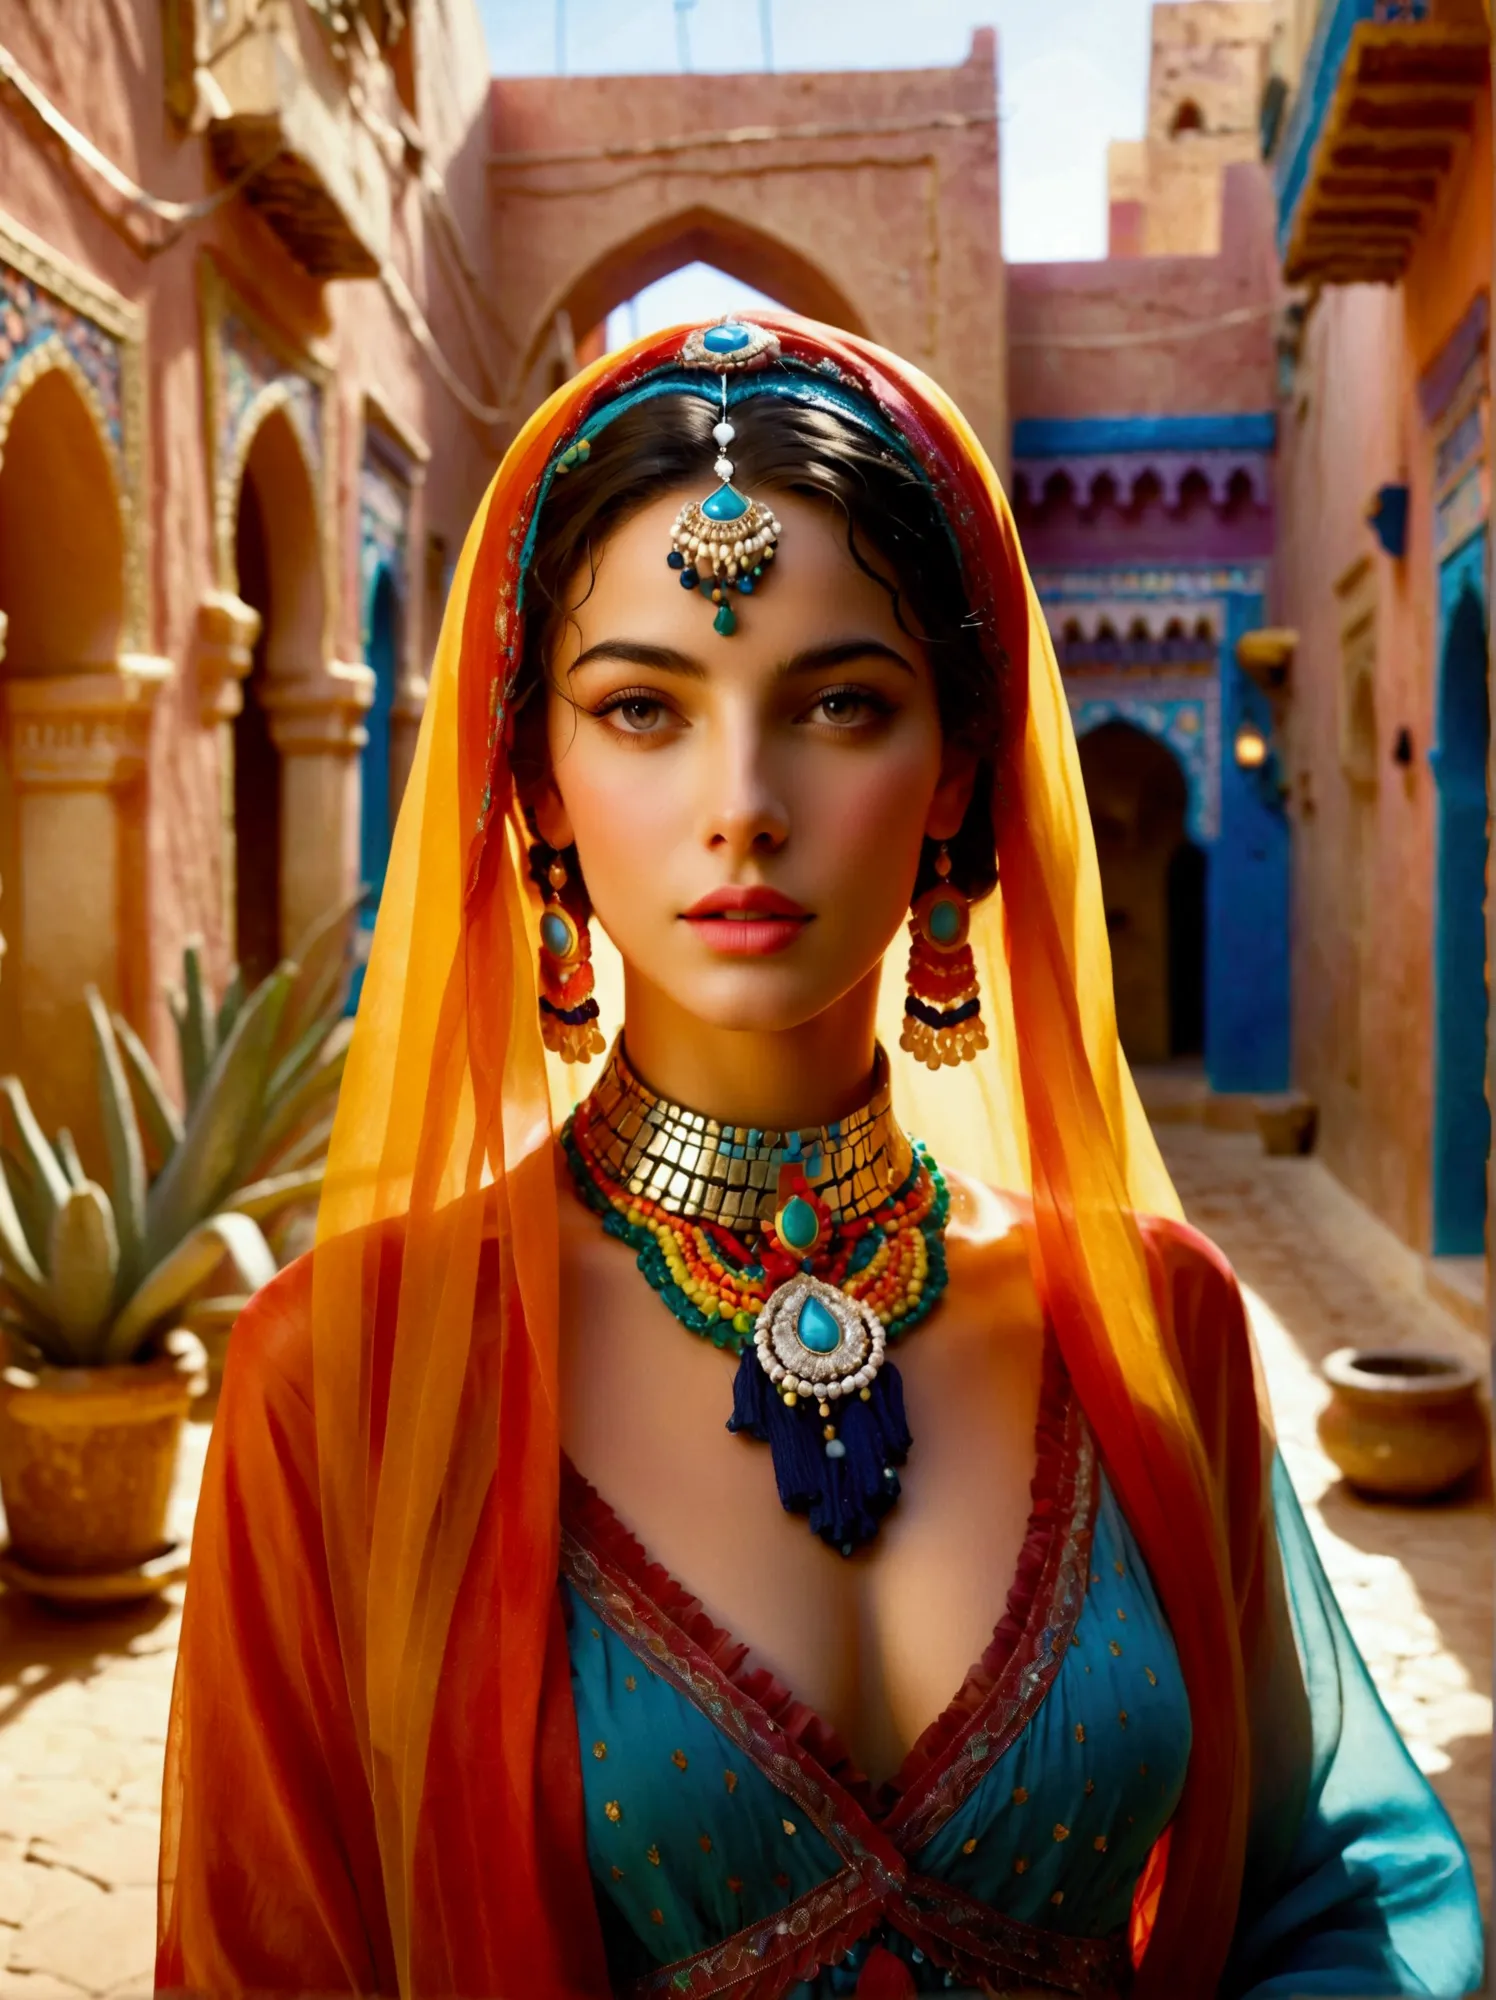 Desert Princess, dressed in vibrant traditional attire, steeped in an atmosphere brimming with magic and whimsy, similar to the ...